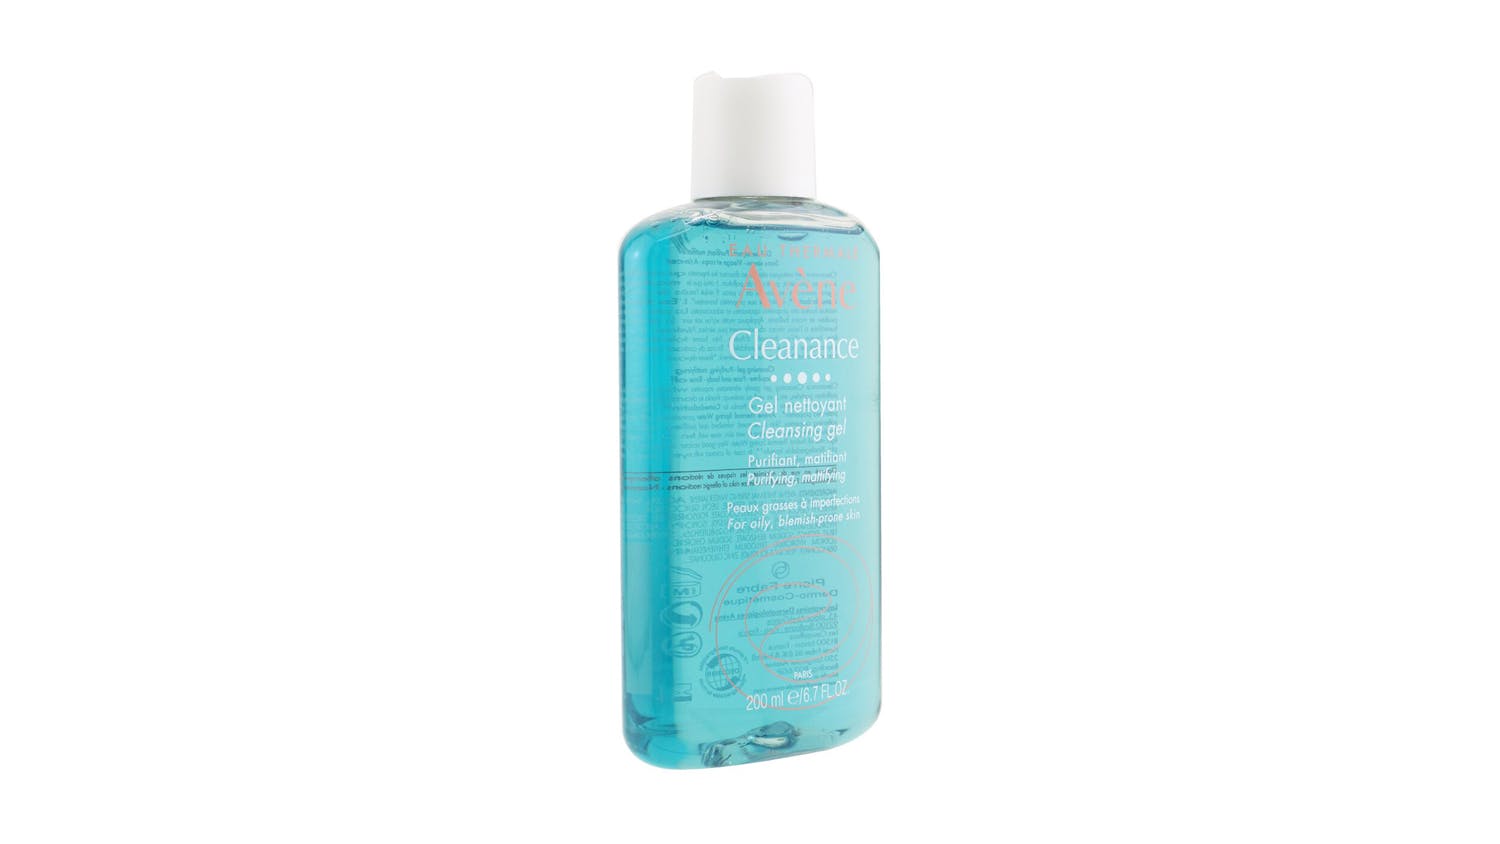 Cleanance Cleansing Gel - For Oily, Blemish-Prone Skin - 200ml/6.7oz